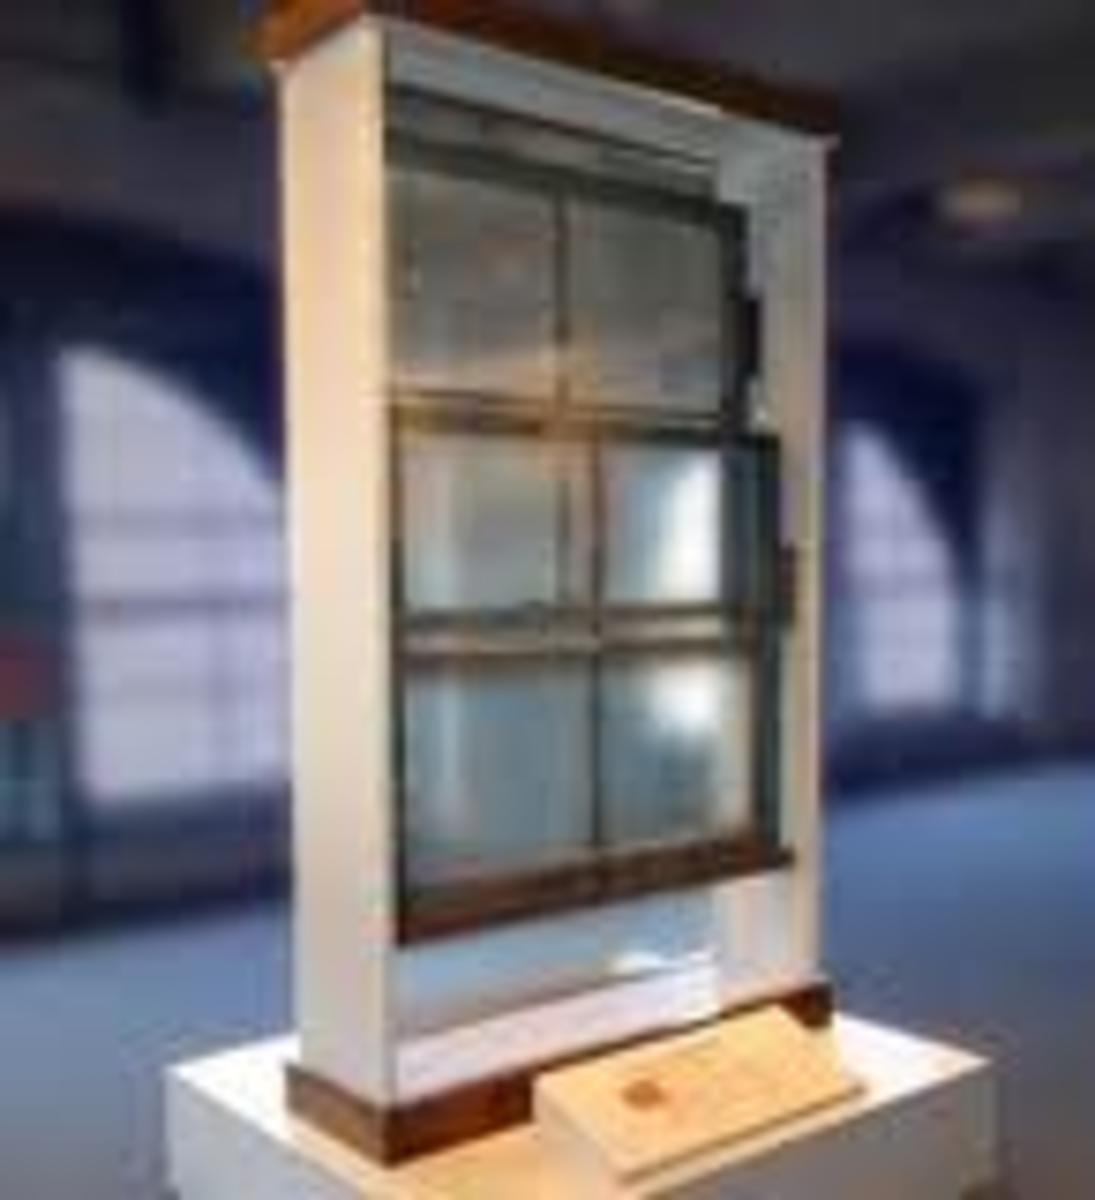 Pulled from the building, the window and frame that Lee Harvey Oswald used.